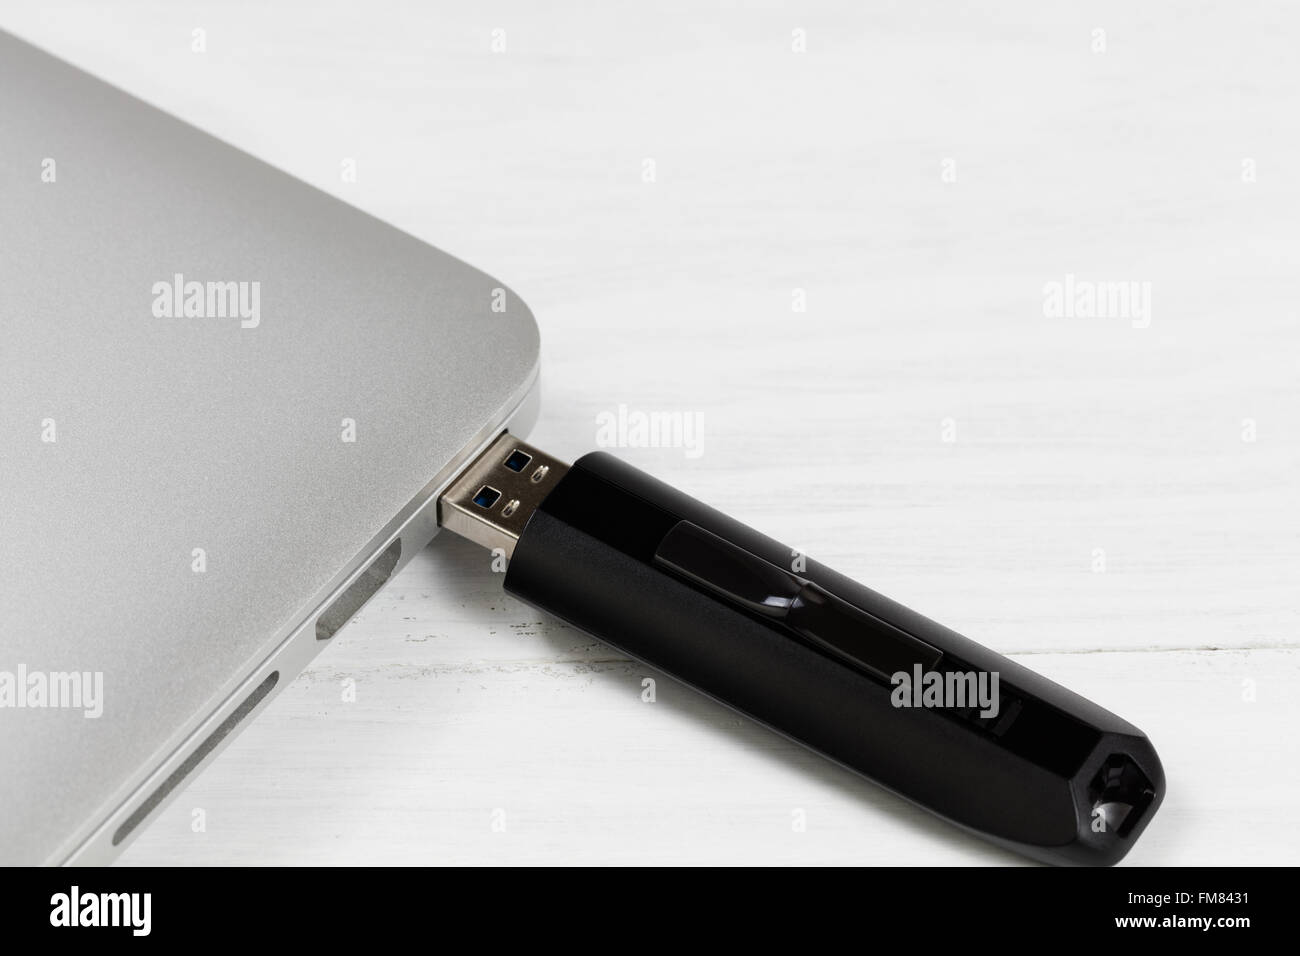 Portable thumb drive plugged into laptop computer USB slot. Selective focus on front part of drive. Stock Photo